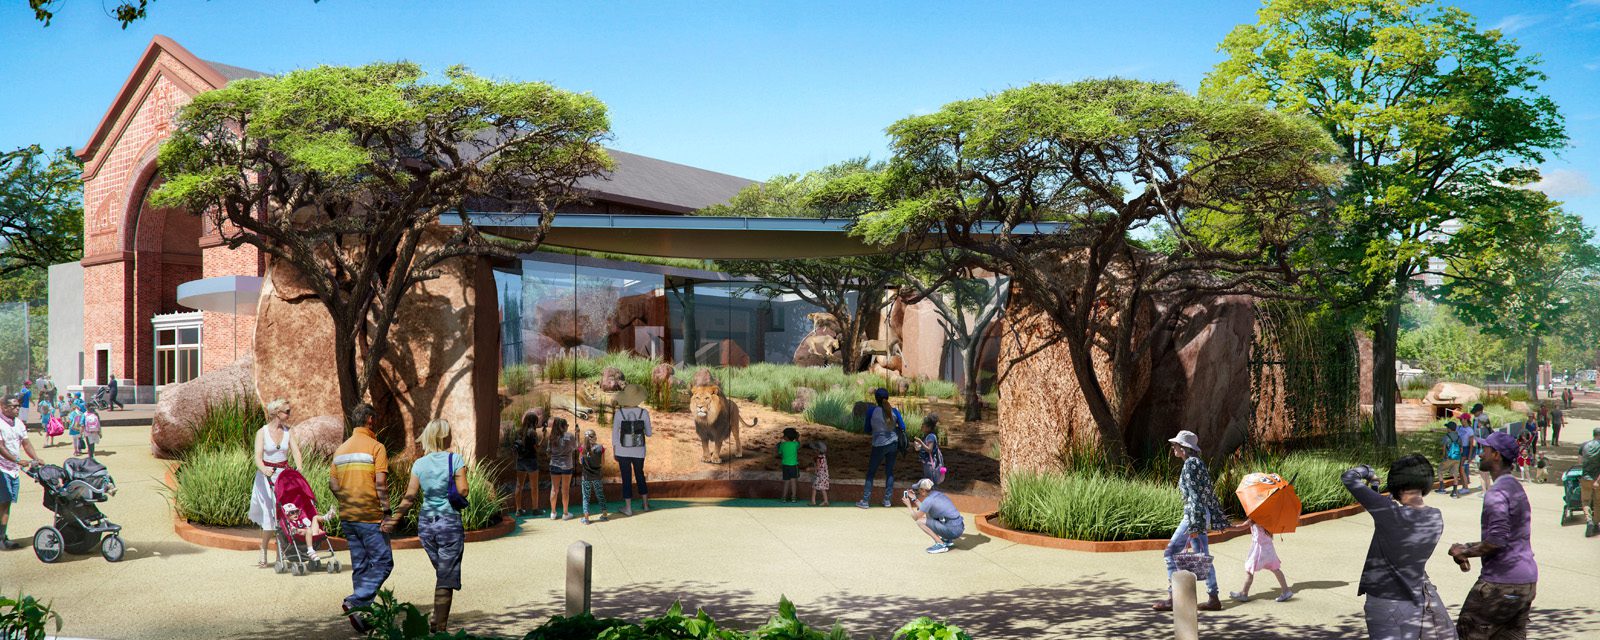 Opening Date and Species Announced for Lincoln Park Zoo’s Pepper Family Wildlife Center